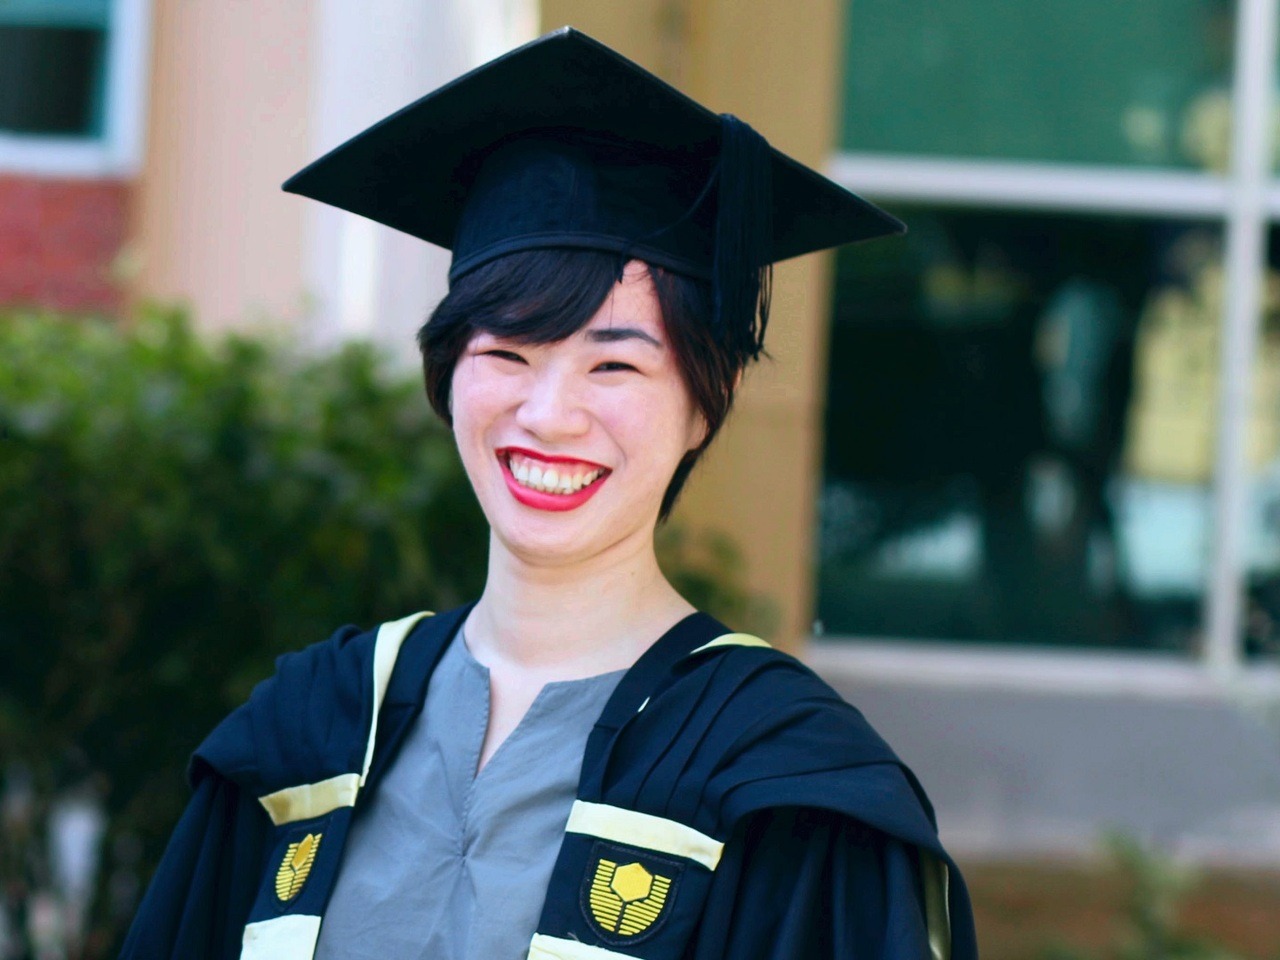 “My life after graduation so far has been filled with interviews, and I find myself referring back to my many experiences in university. My greatest achievements and proudest triumphs came from events that almost never were, where I was tempted to...